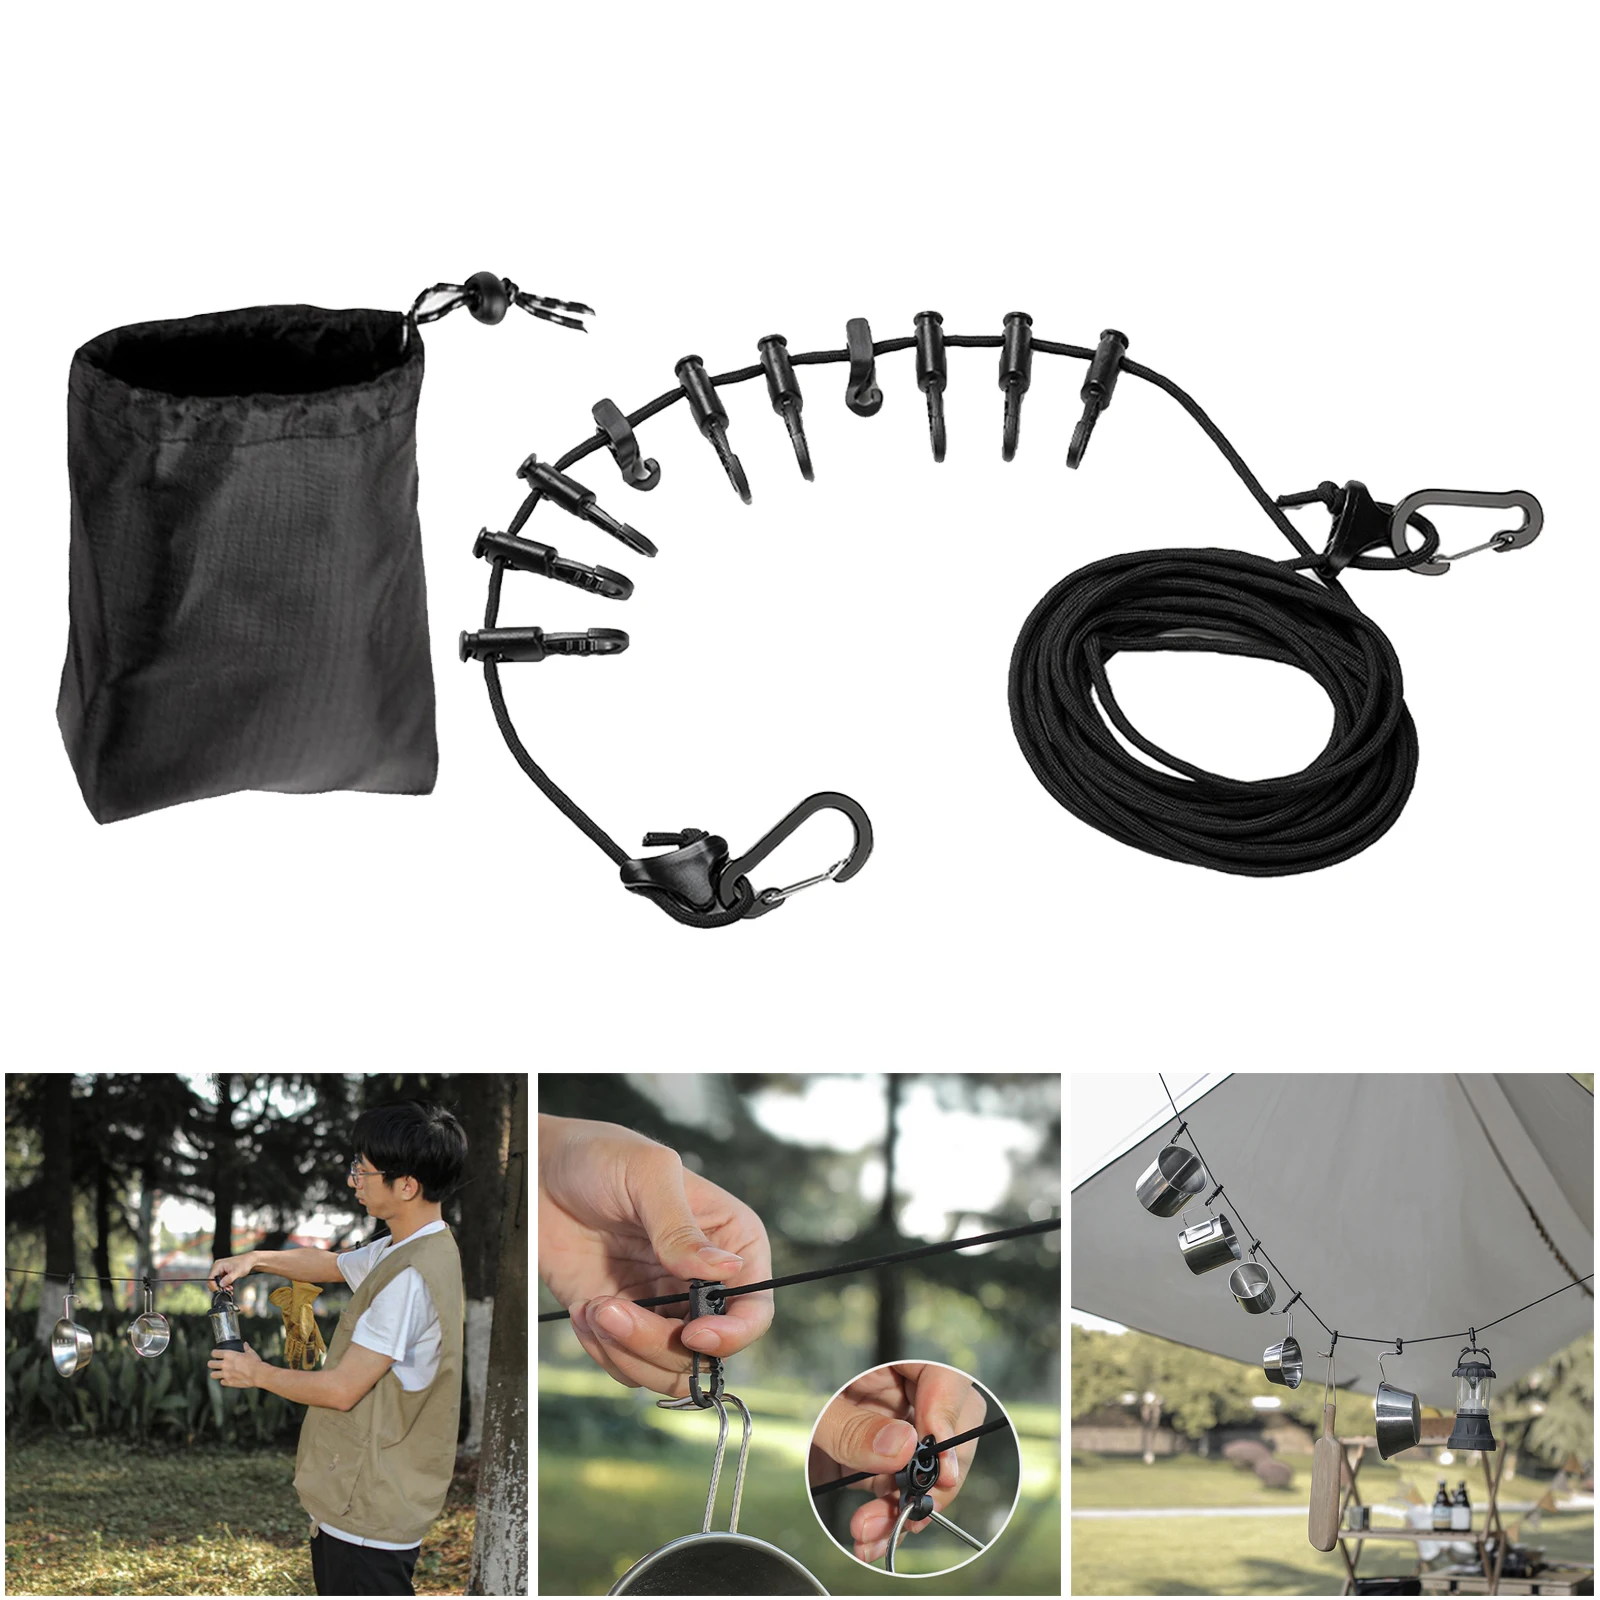 Rope Outdoor Camping Gear and Accessories Clothesline Storage Strap Hammock Tent Hanger Lanyard Strap Supplies Outdoor